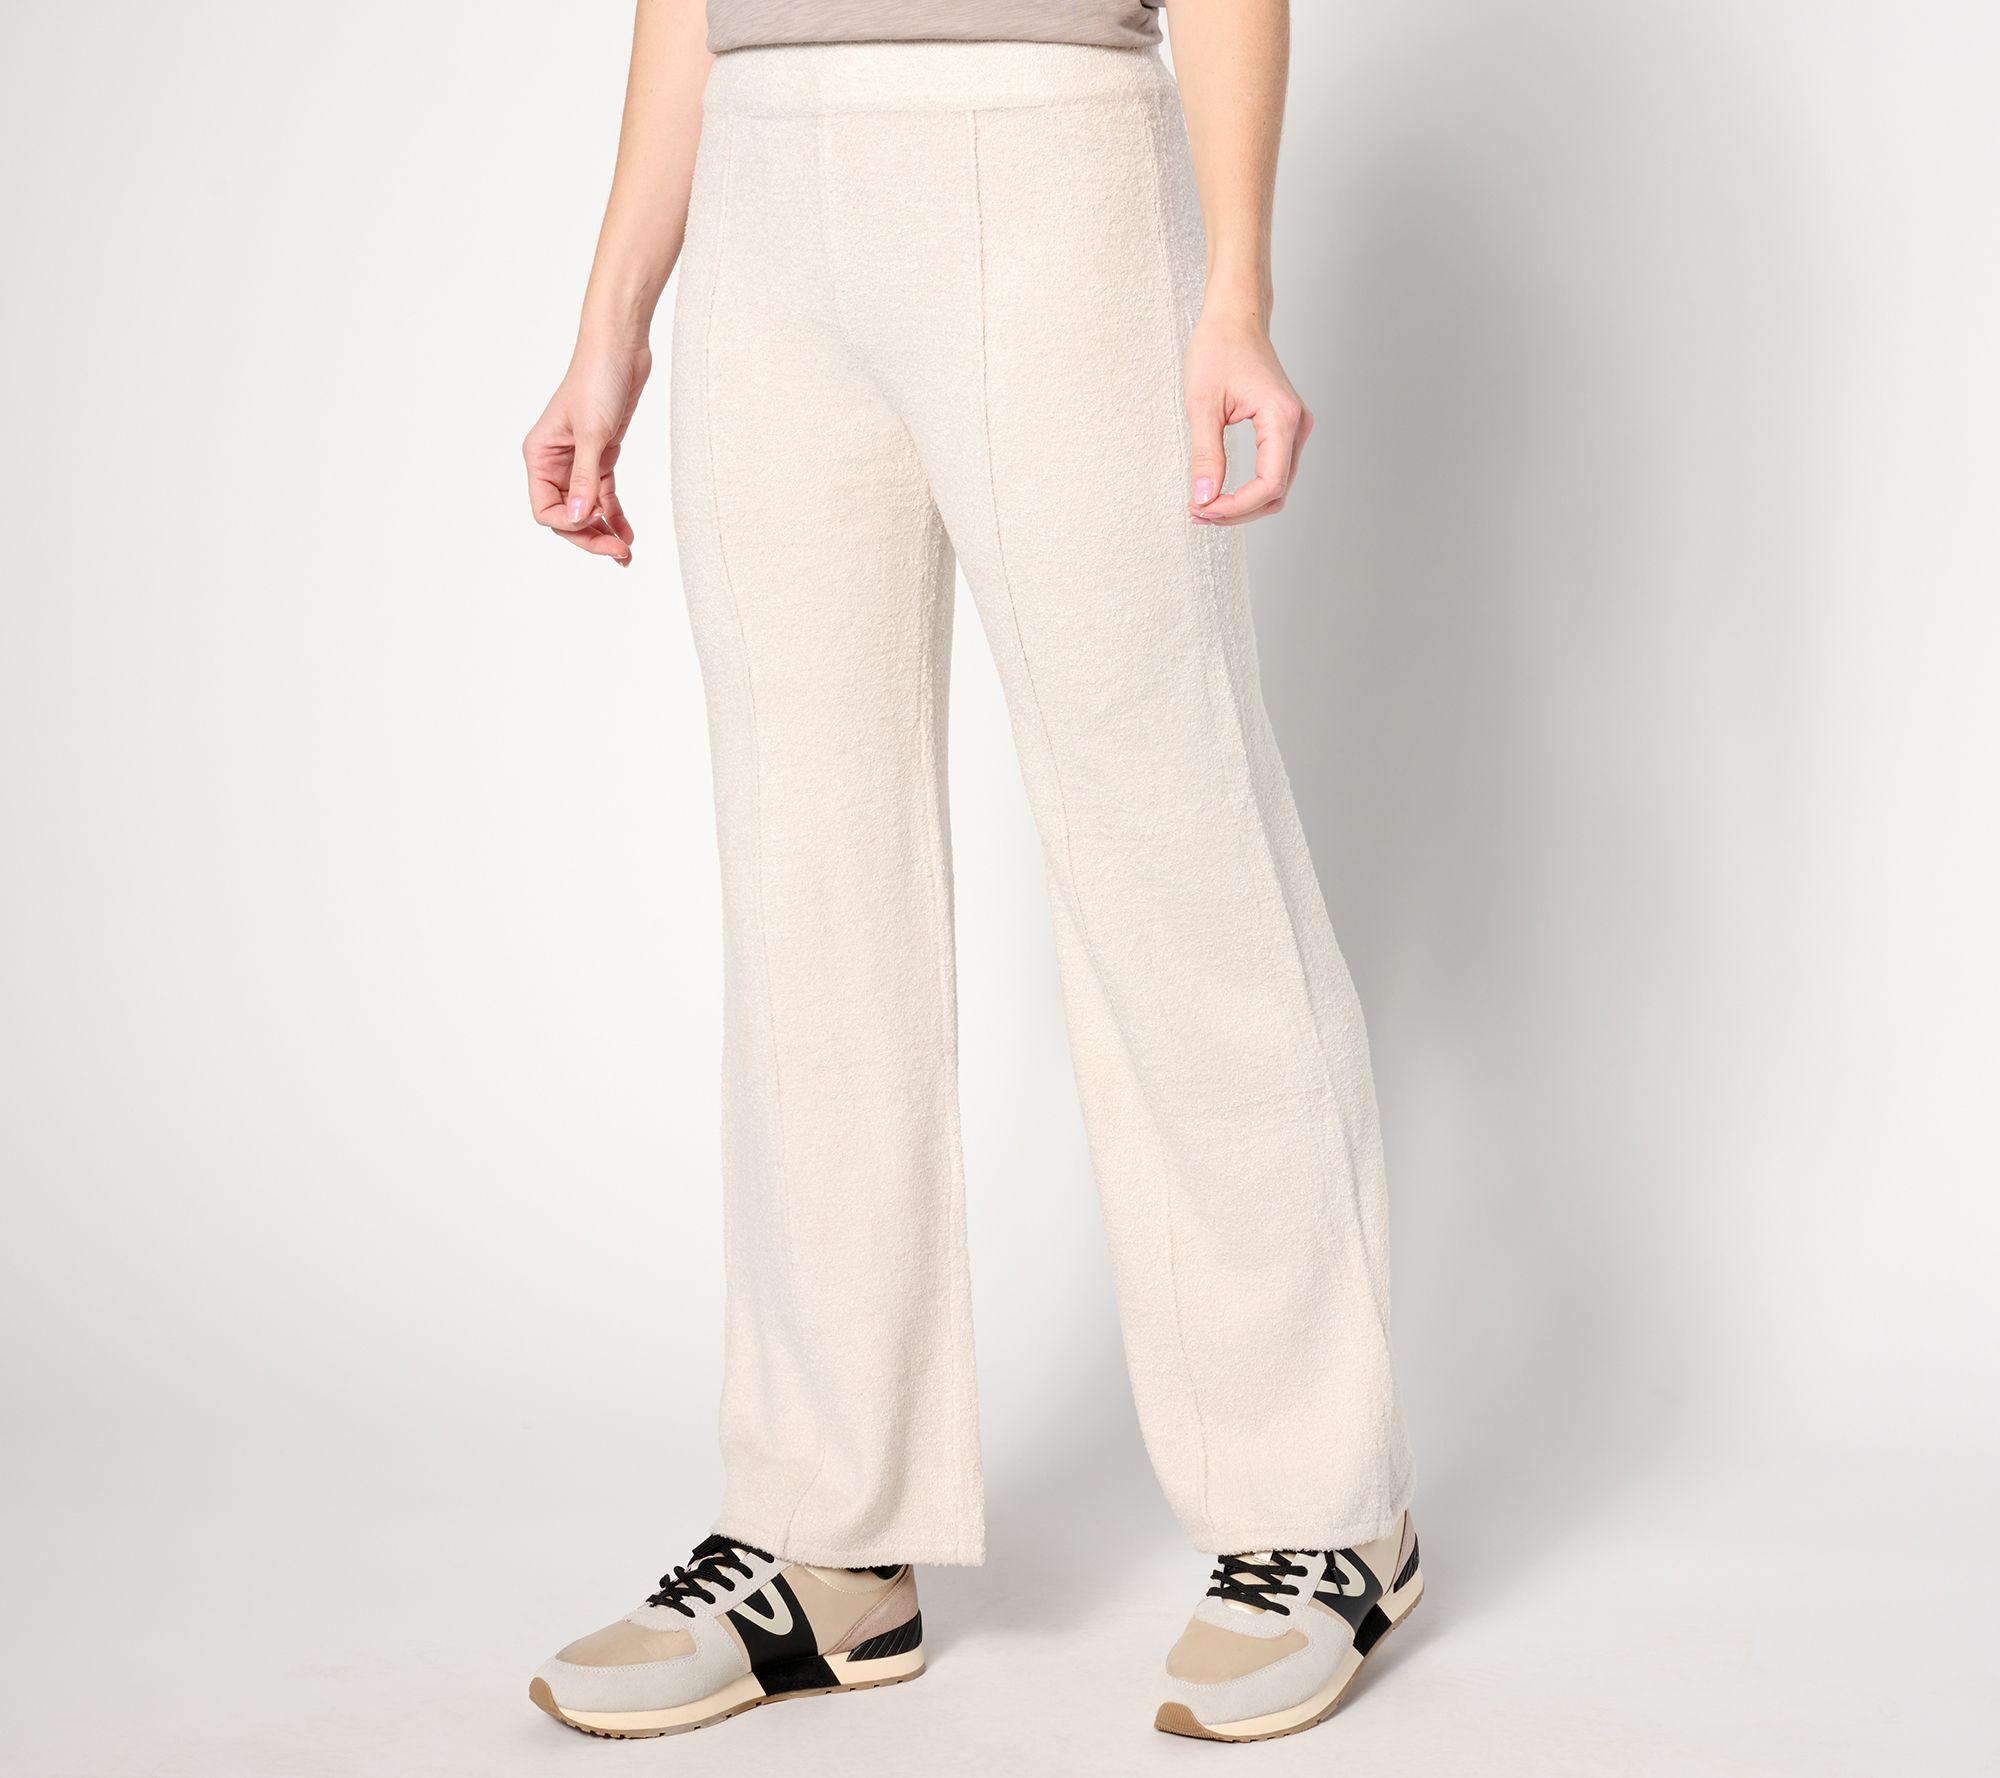 Free People Livin In The City Seamed Pants